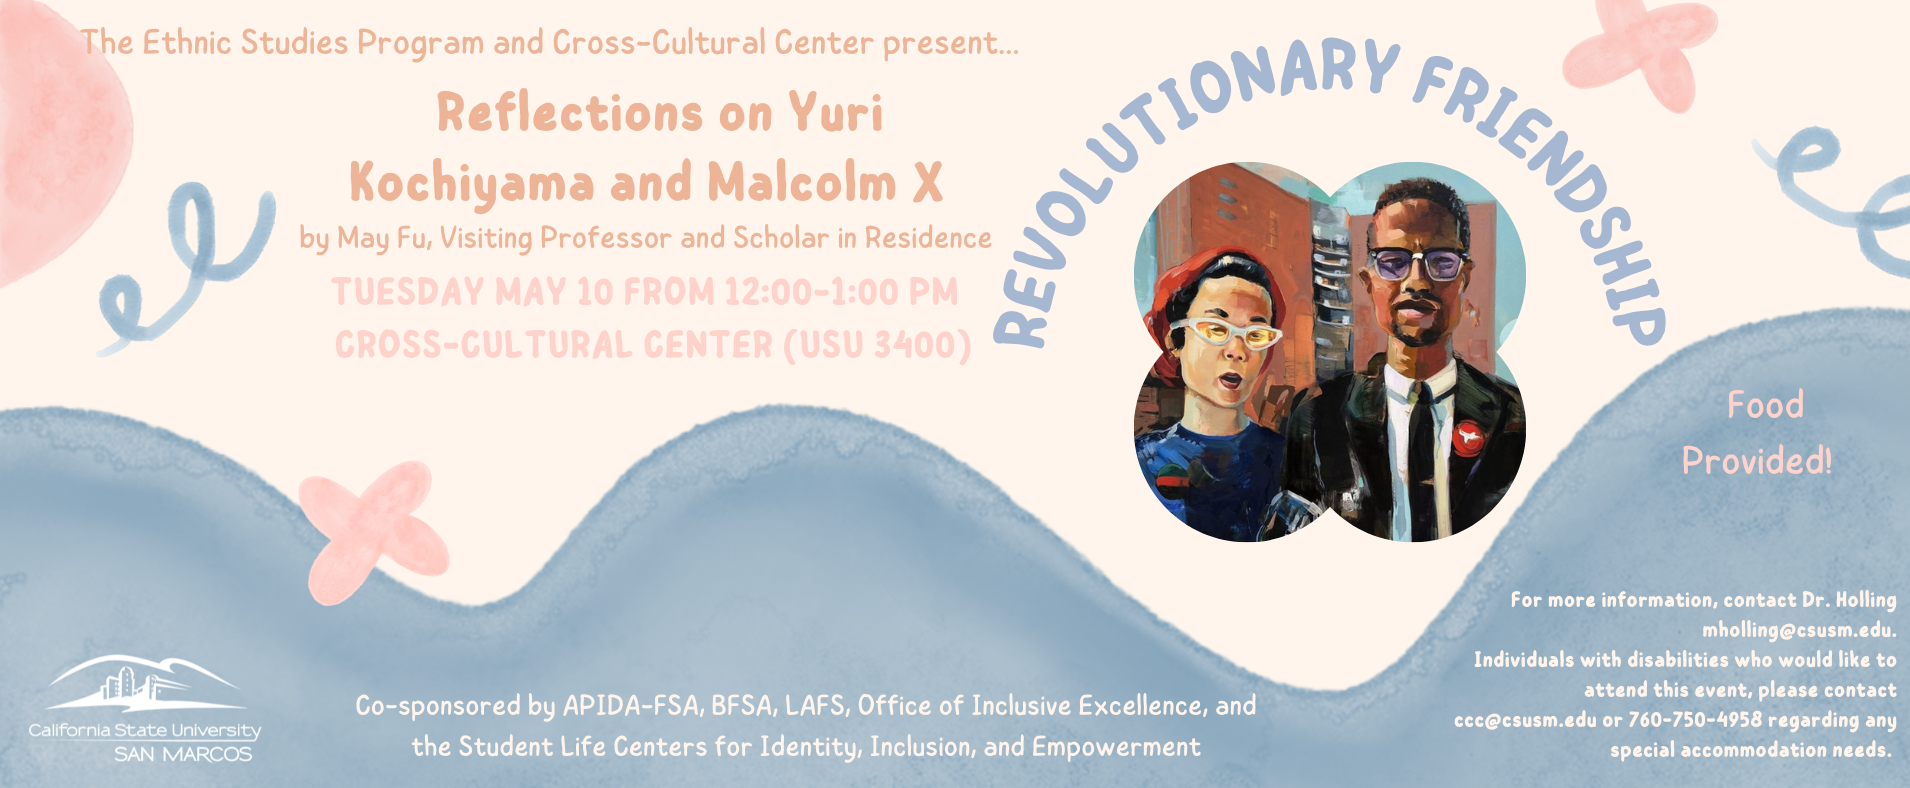 Revolutionary Friendship: Reflections on Yuri Kochiyama and Malcolm X - Tuesday, May 10, 2022 - 12pm to 1pm - Cross-Cultural Center (USU 3400)